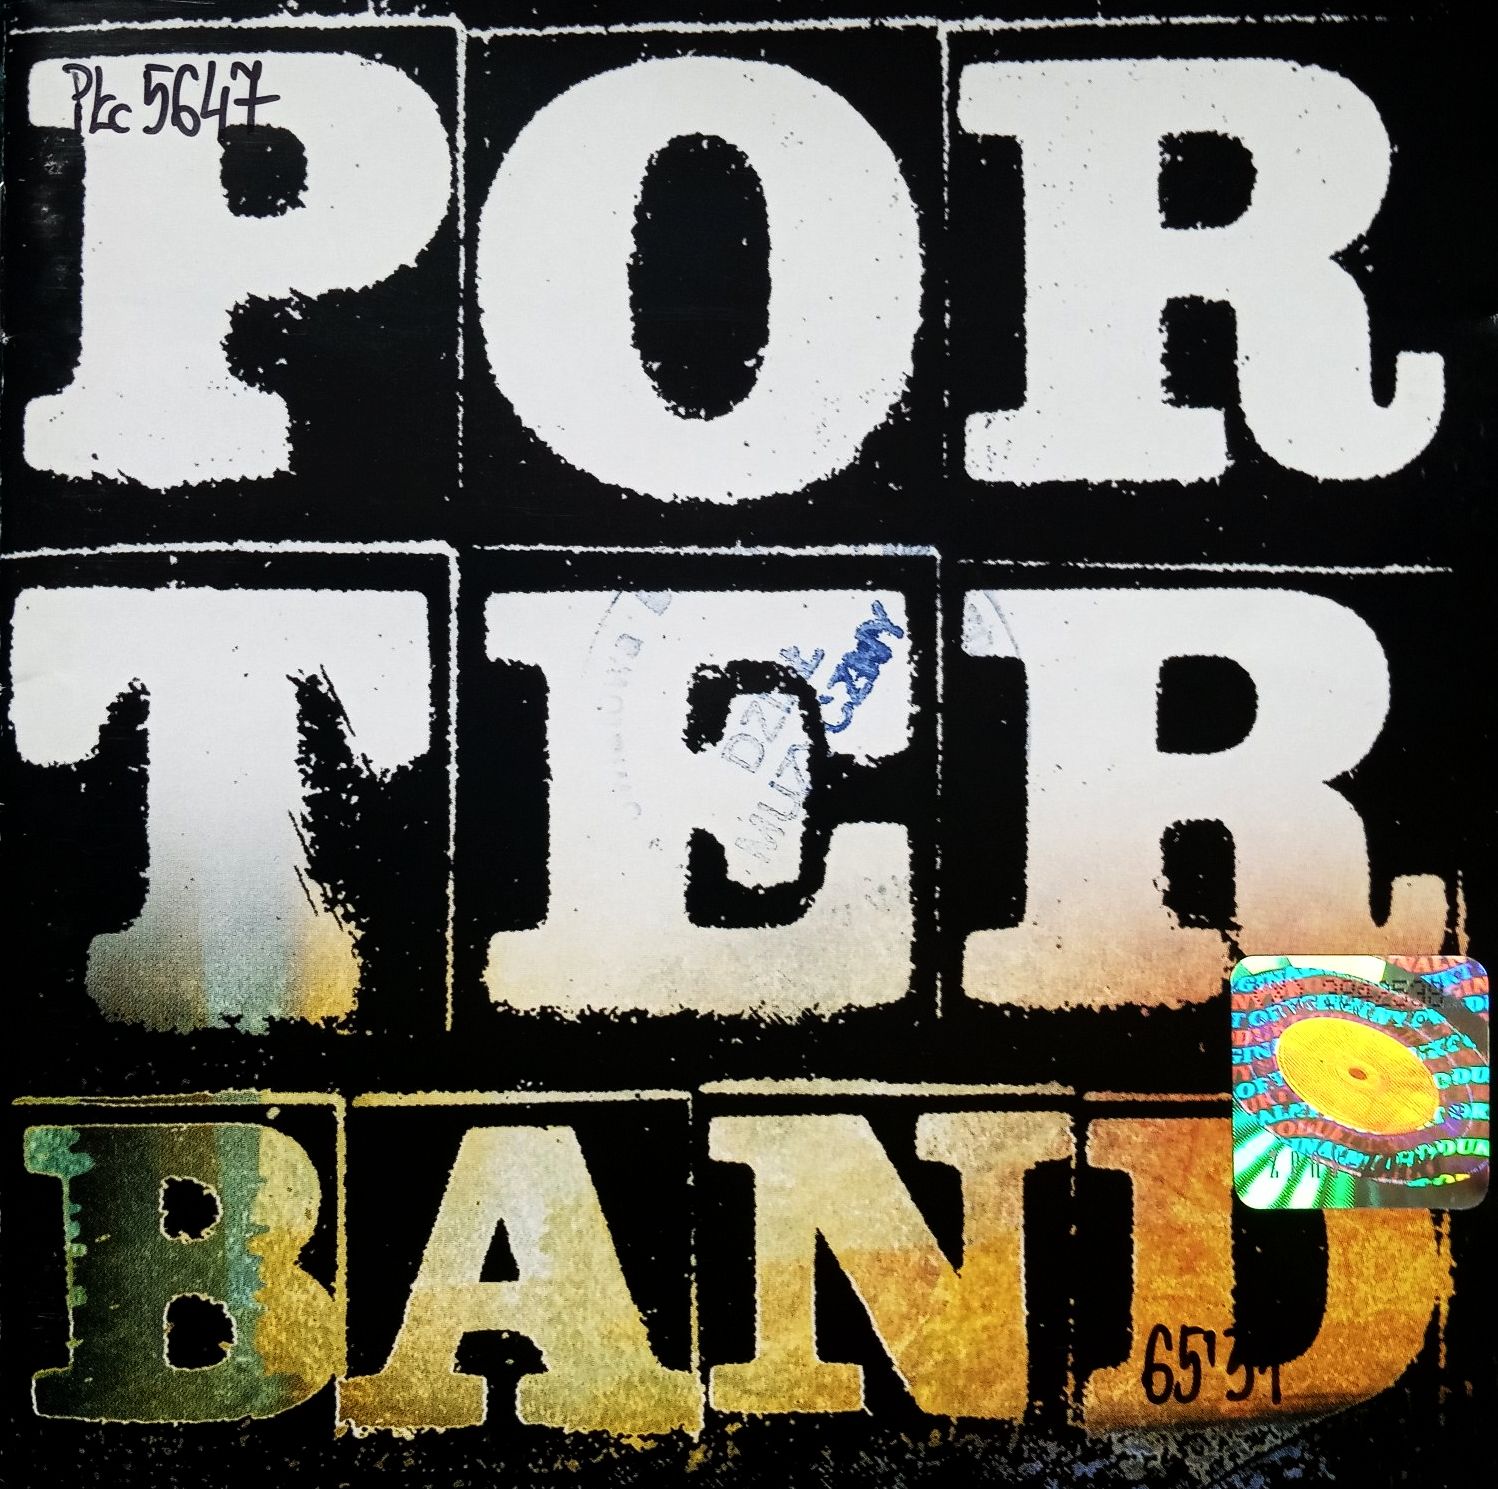 PORTER BAND - Electric